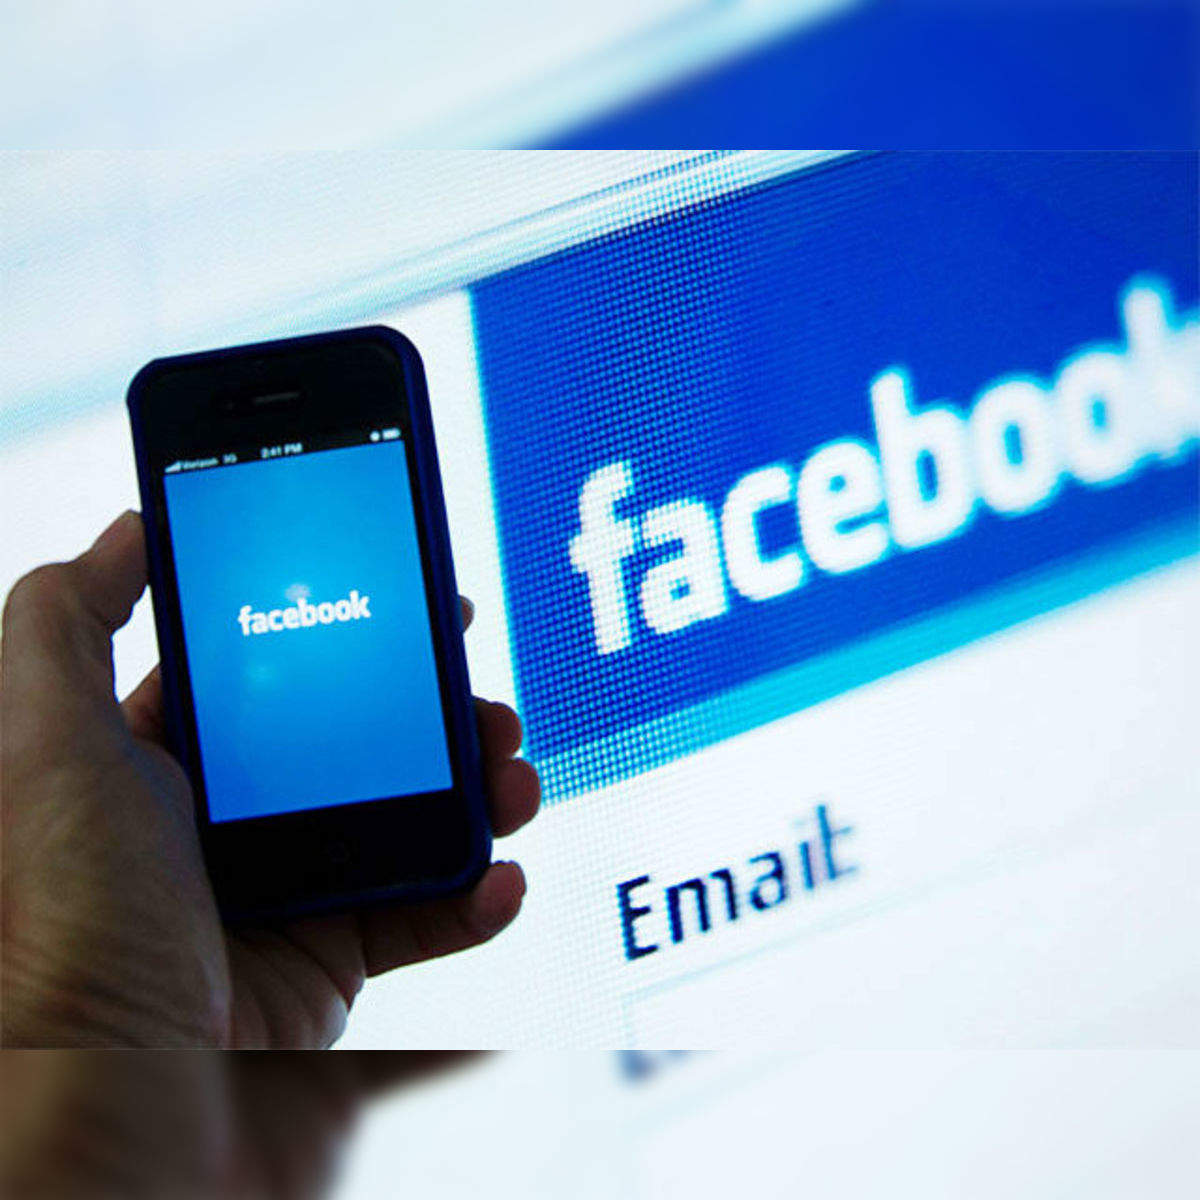 Facebook launches 'Facebook Lite' app for Android devices - The Economic  Times